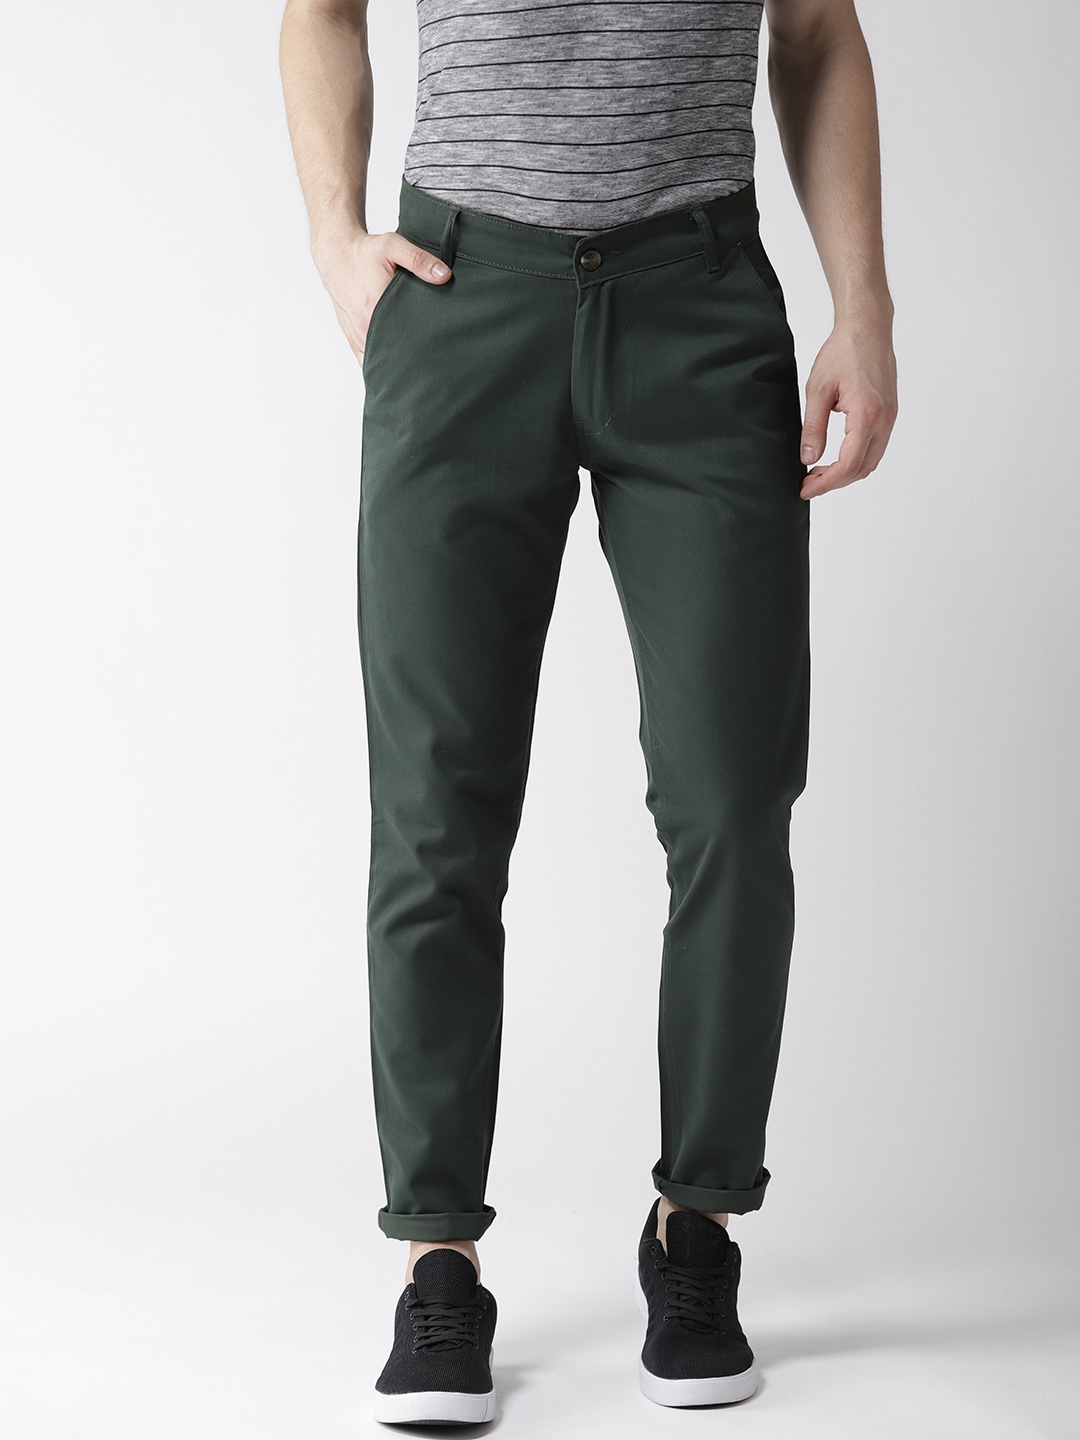 Green Tapered Pant  DIVAWALK  Online Shopping for Designer Jewellery  Clothing Handbags in India